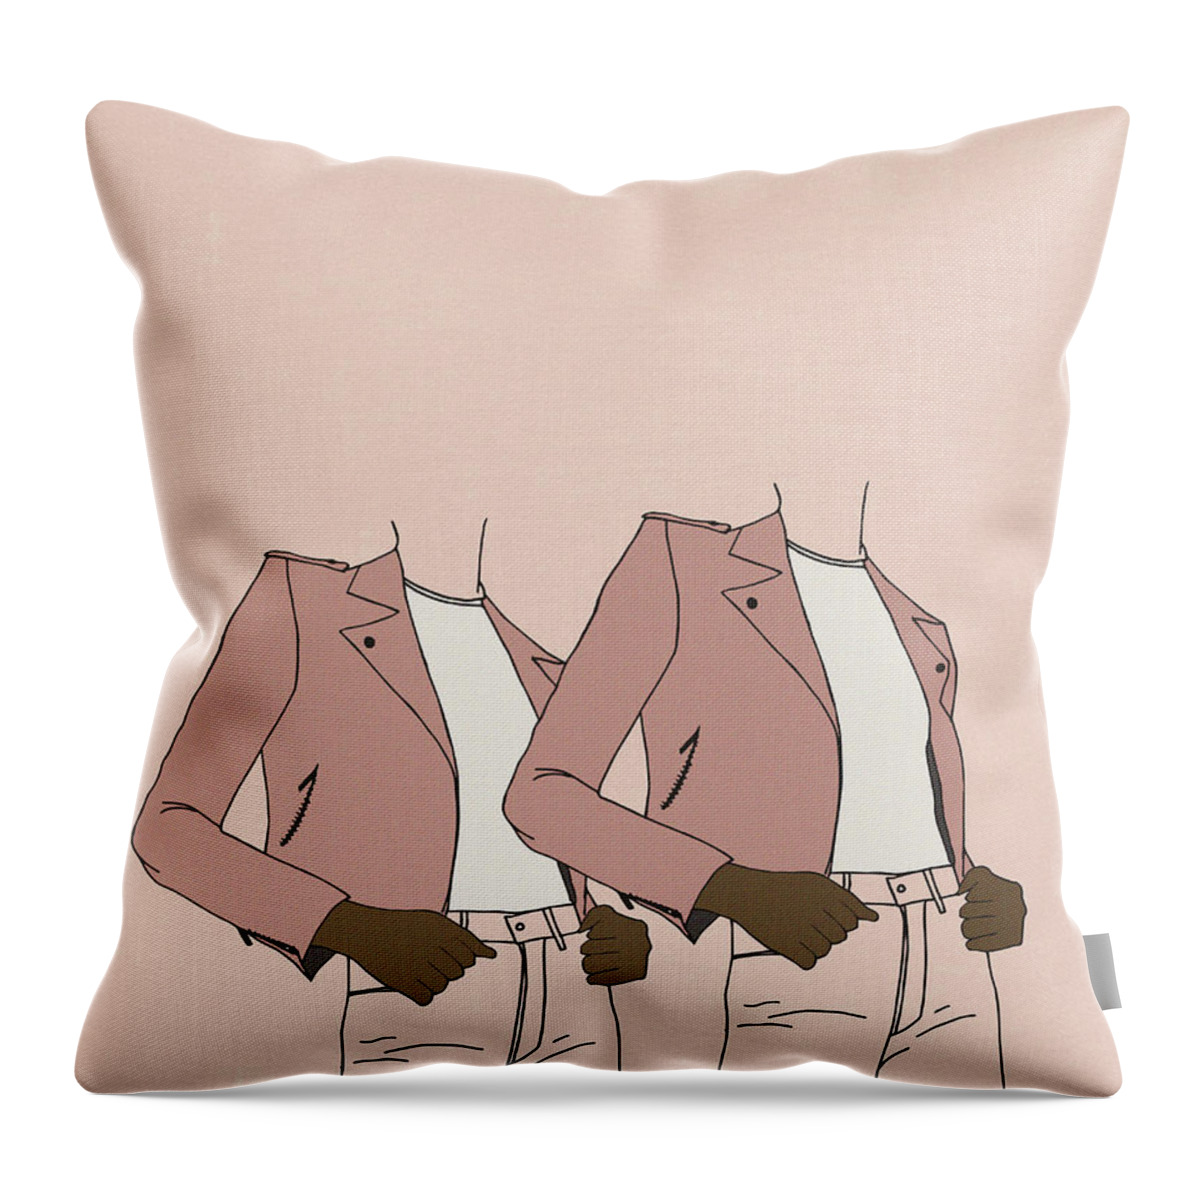 Girl Throw Pillow featuring the digital art Double Power by Cortney Herron